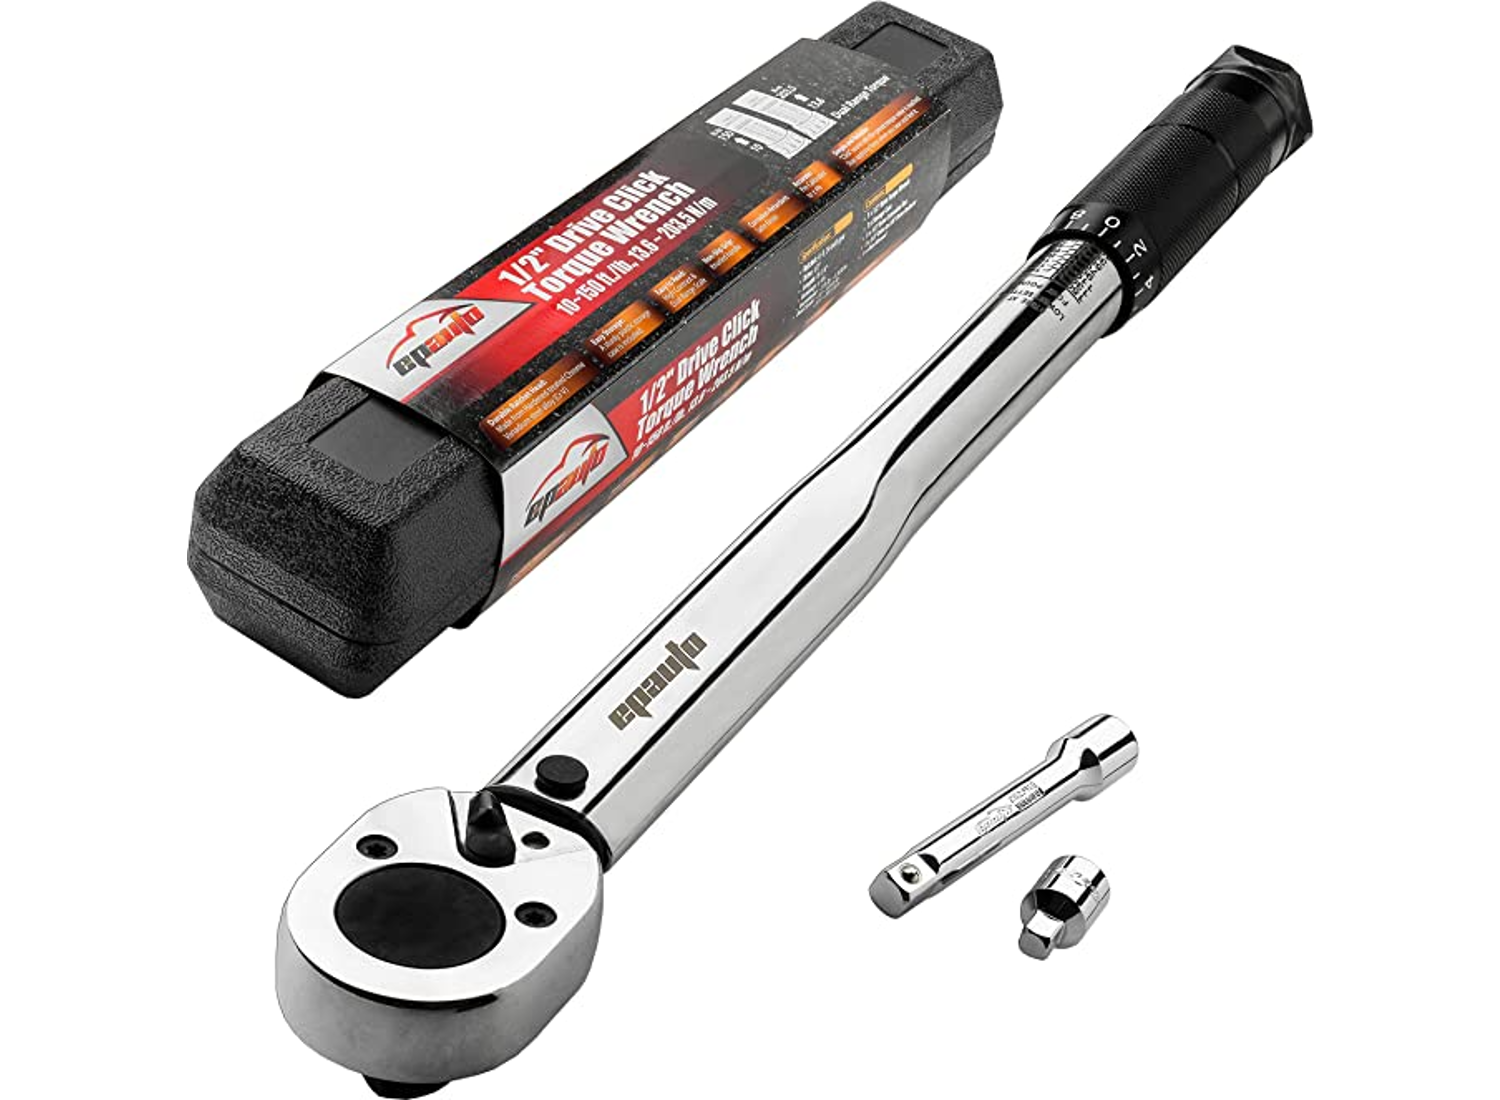 A silver torque wrench with a black grip handle next to its case and accessories